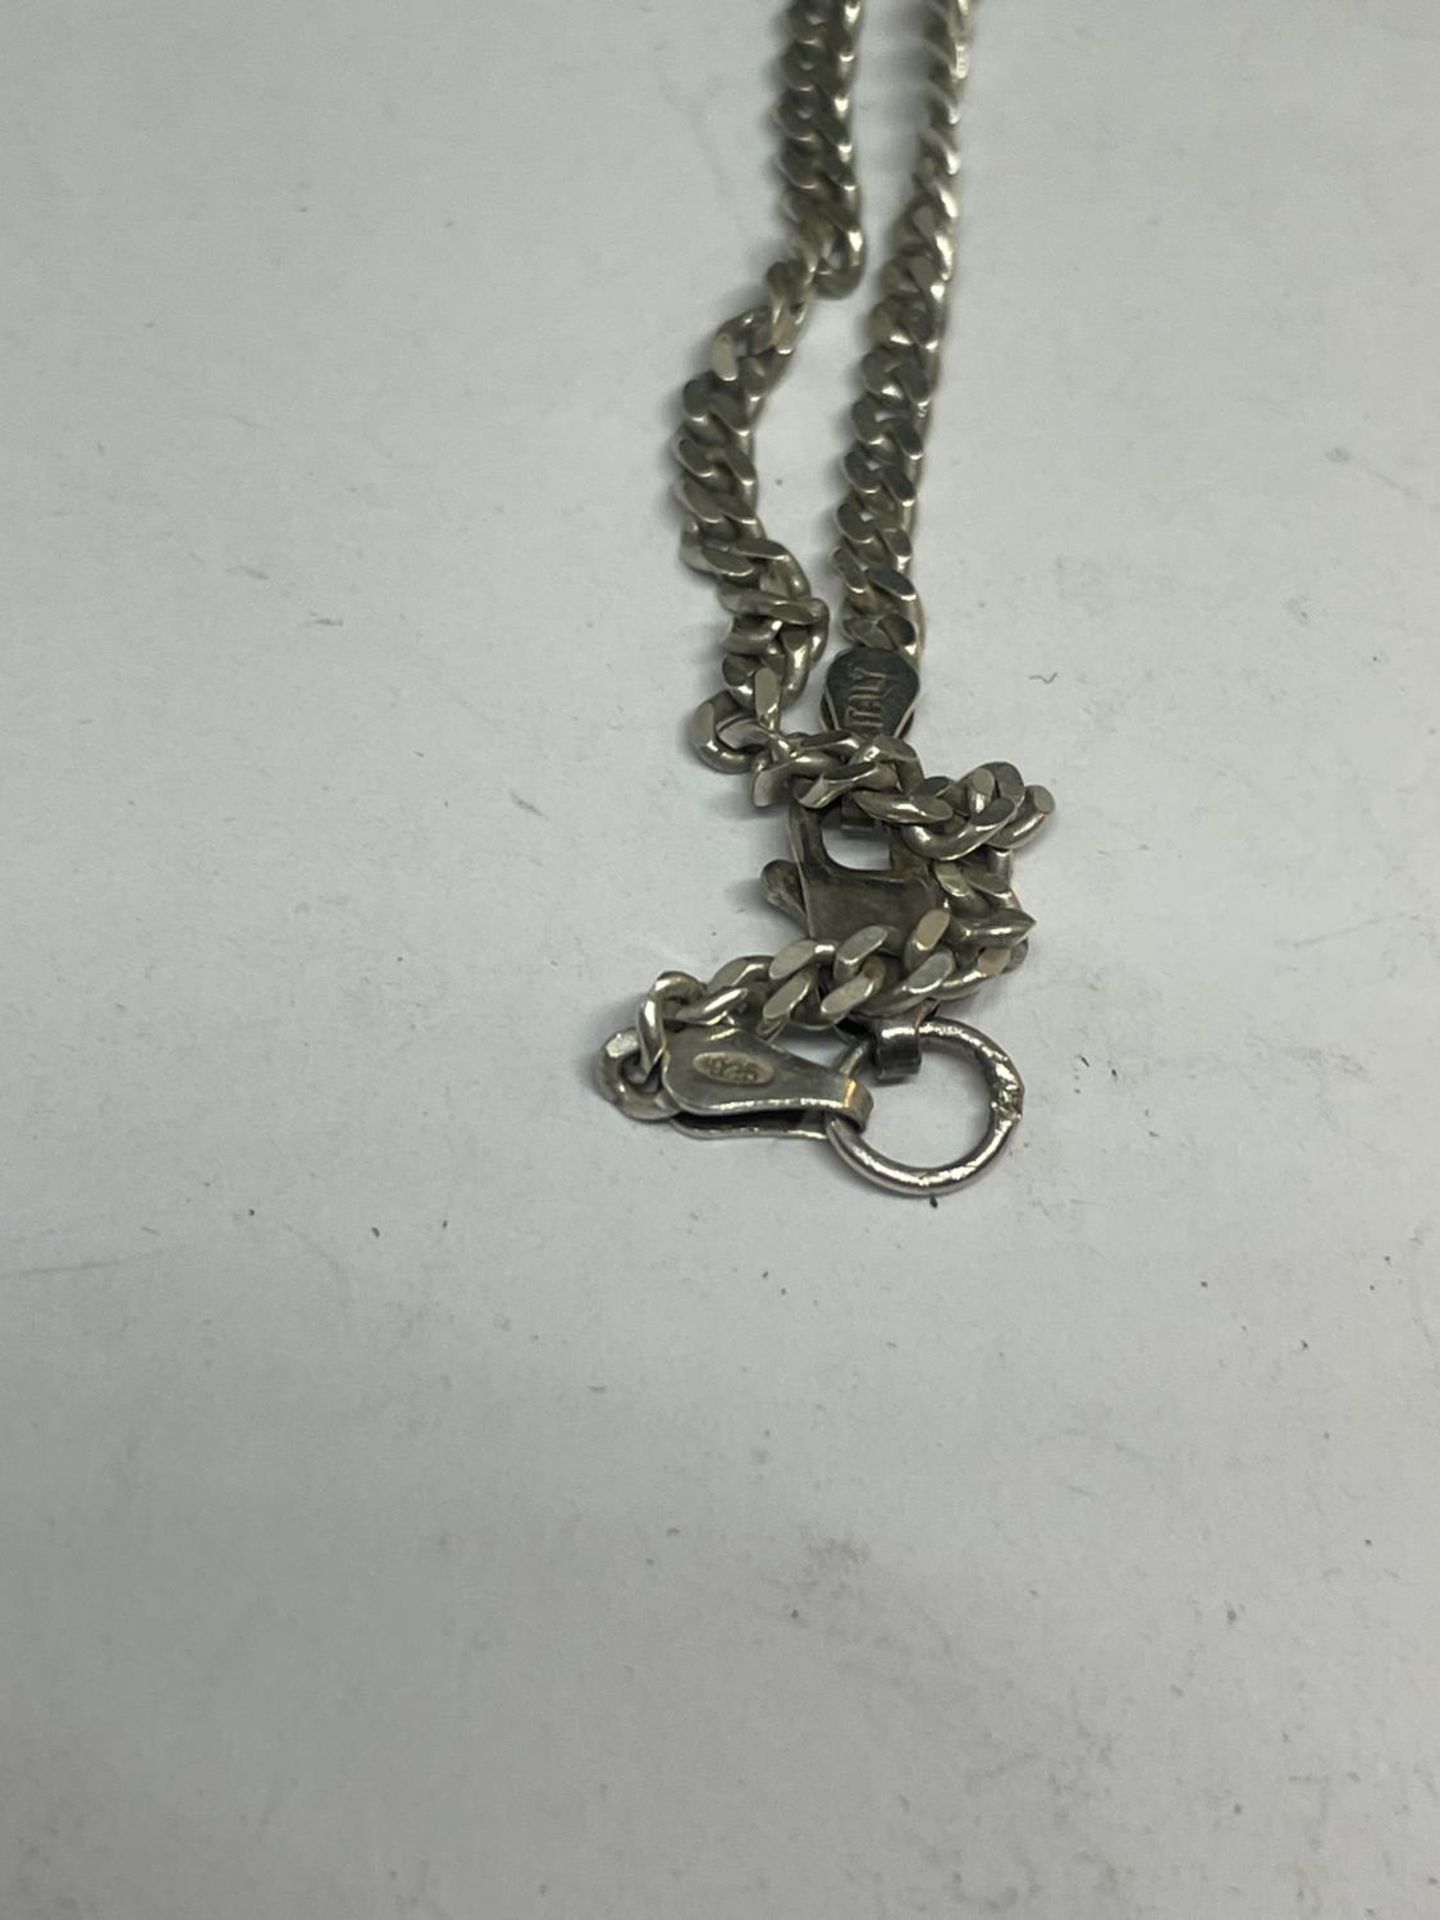 A SILVER KEY NECKLACE IN A PRESENTATION BOX - Image 3 of 3